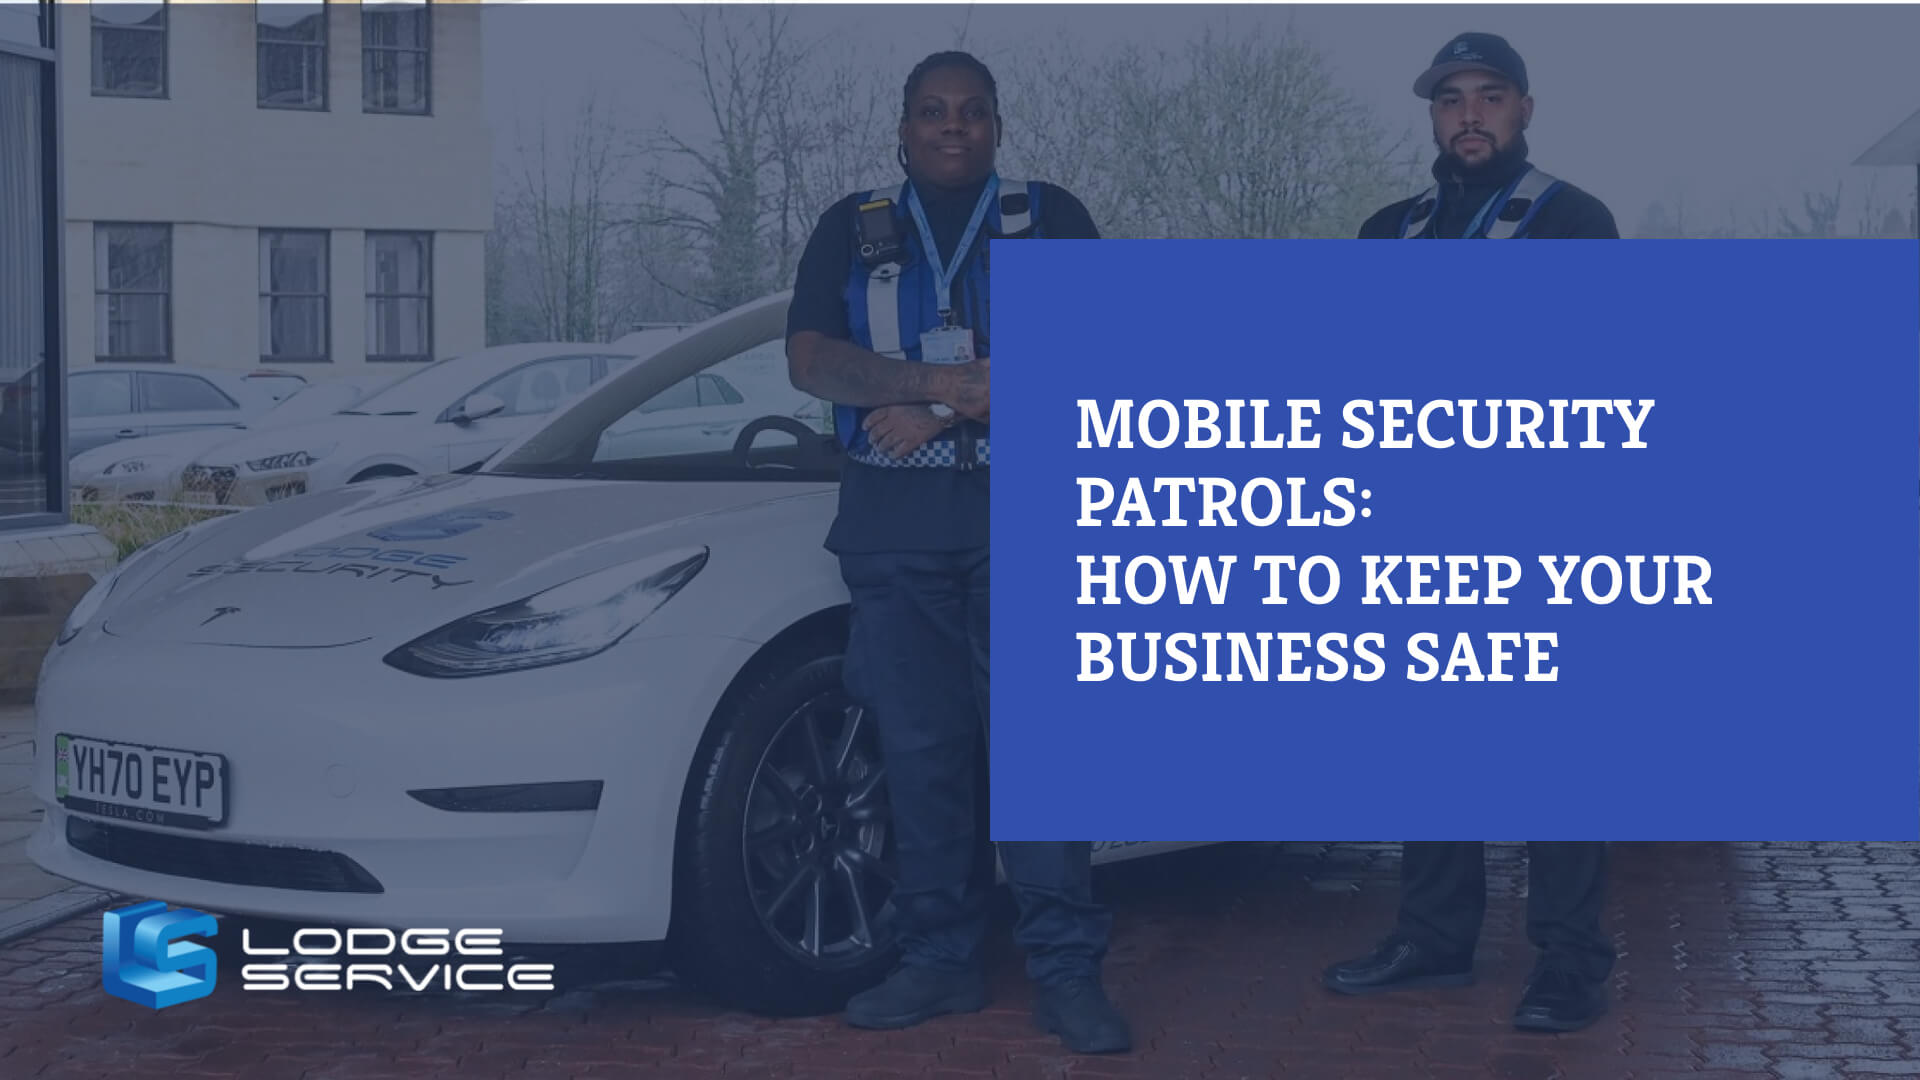 Mobile Security Patrols: How to Keep Your Business Safe